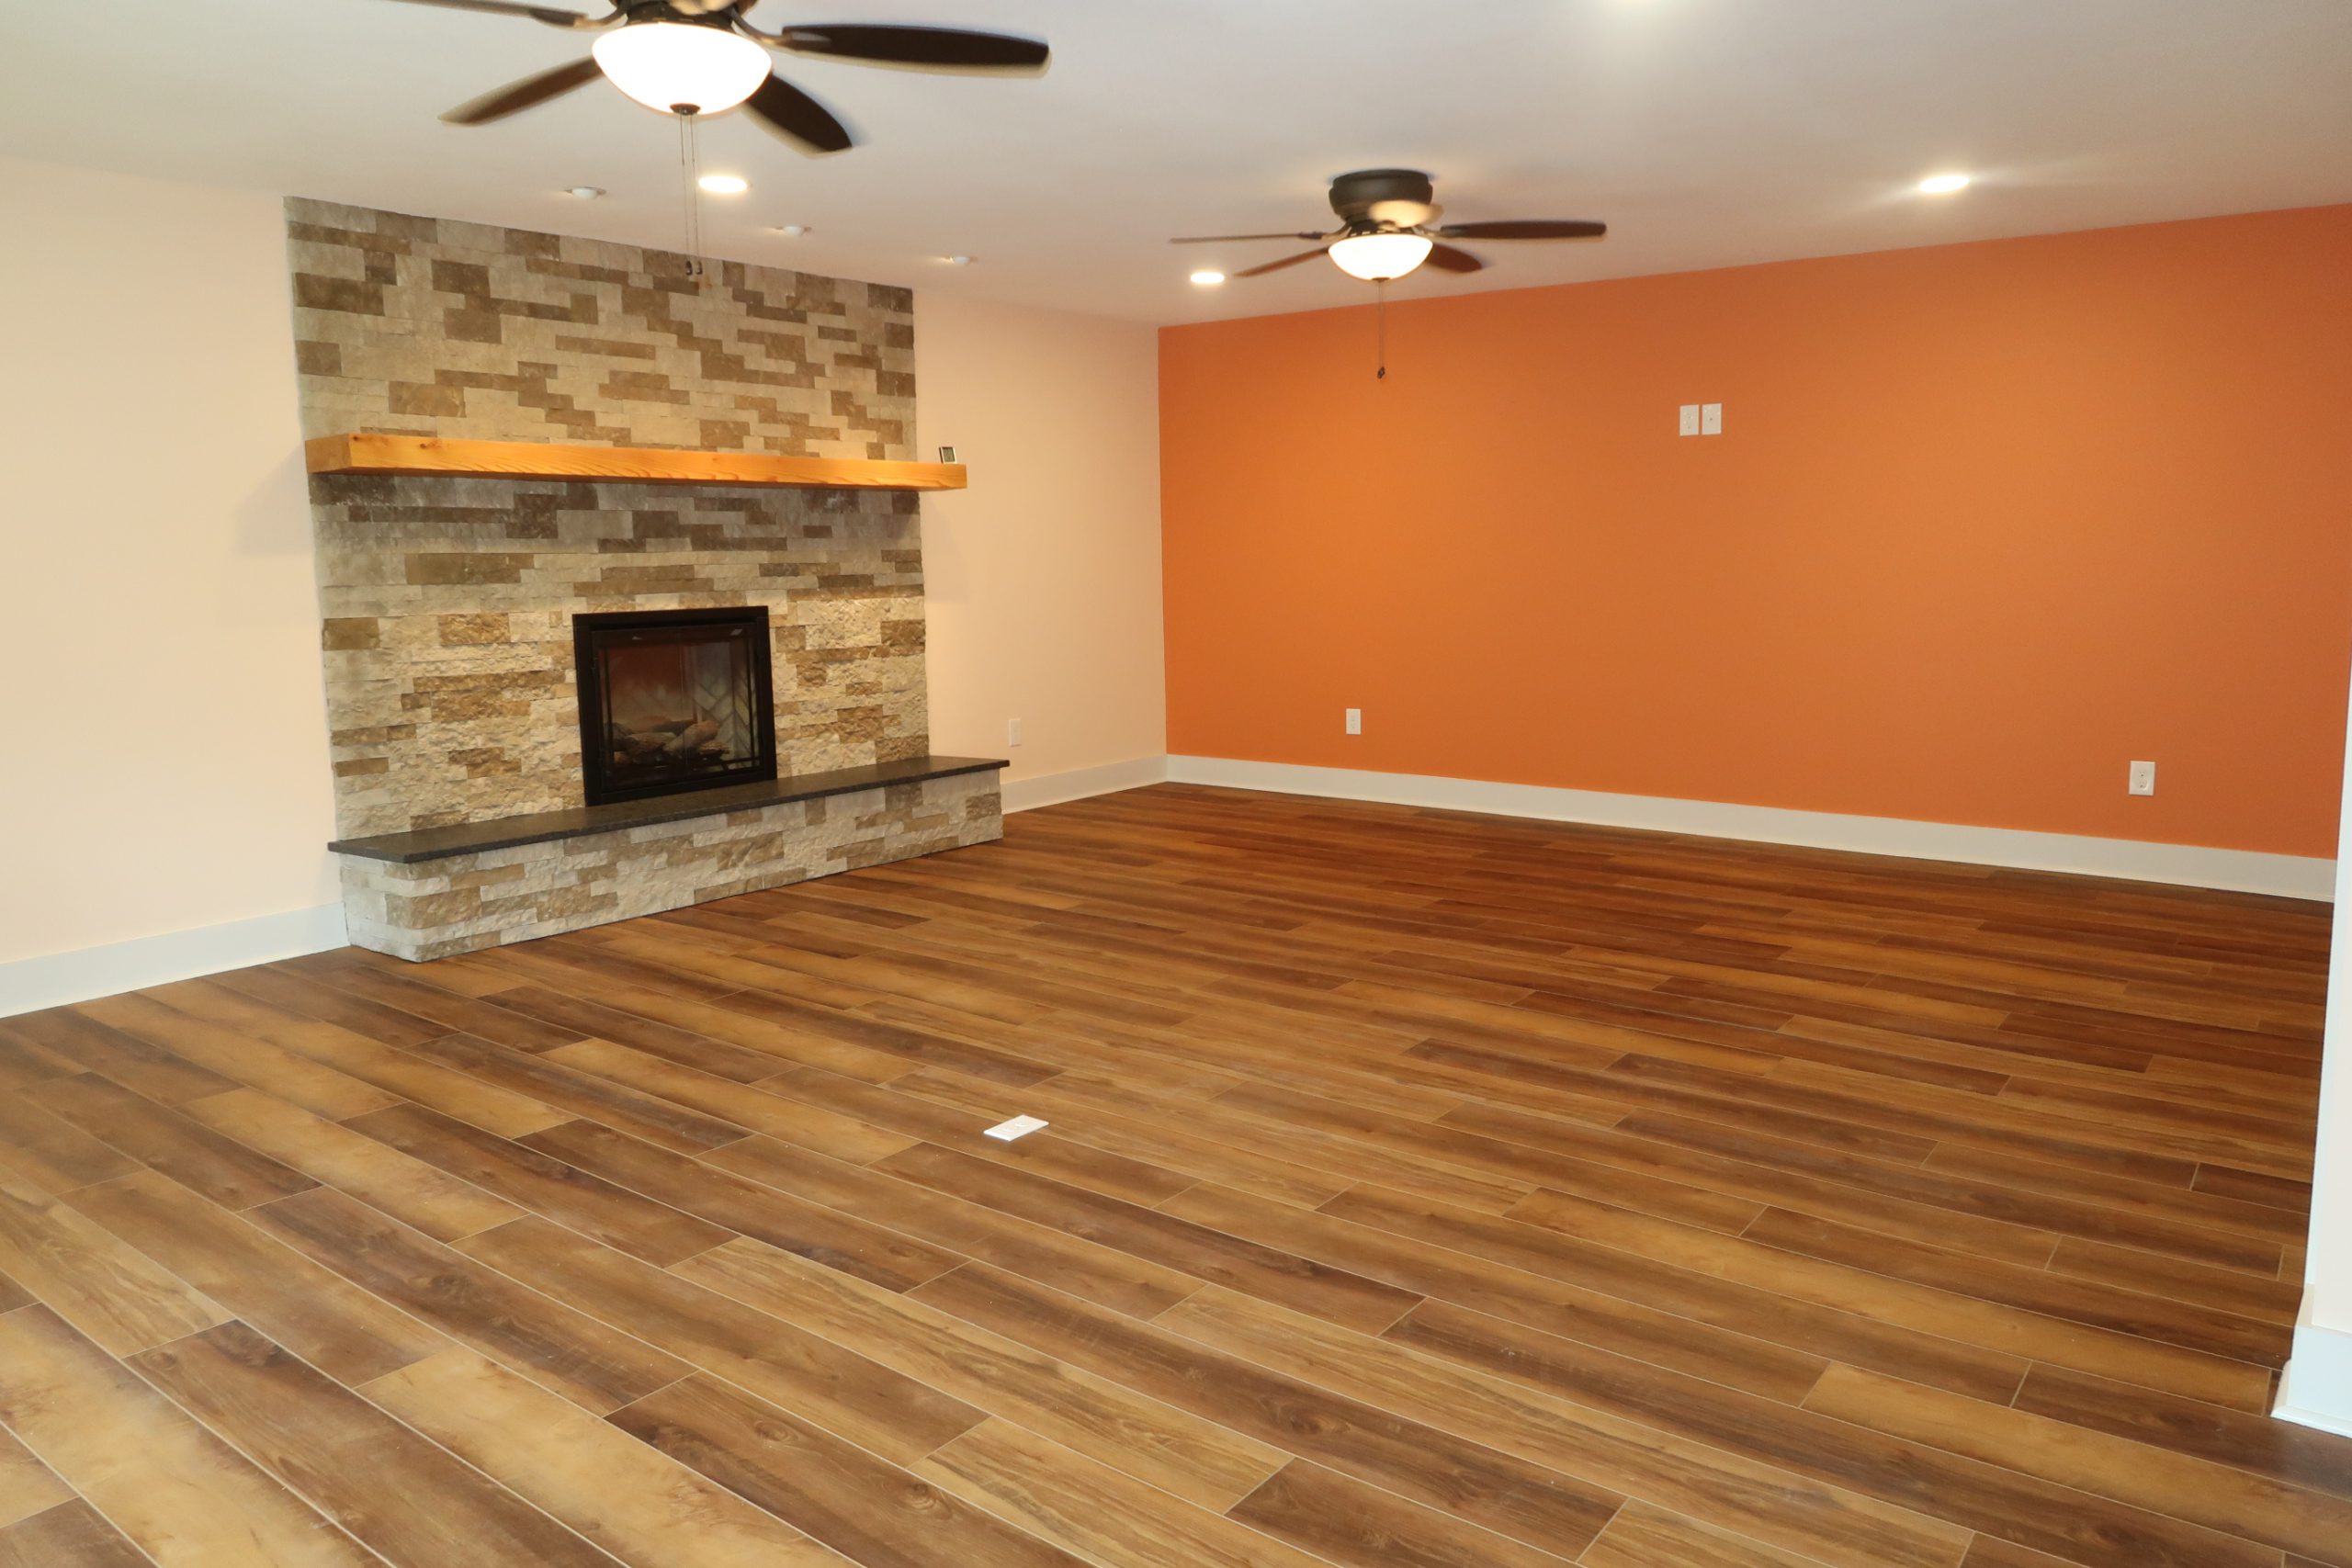 living space remodeling knoxville tn